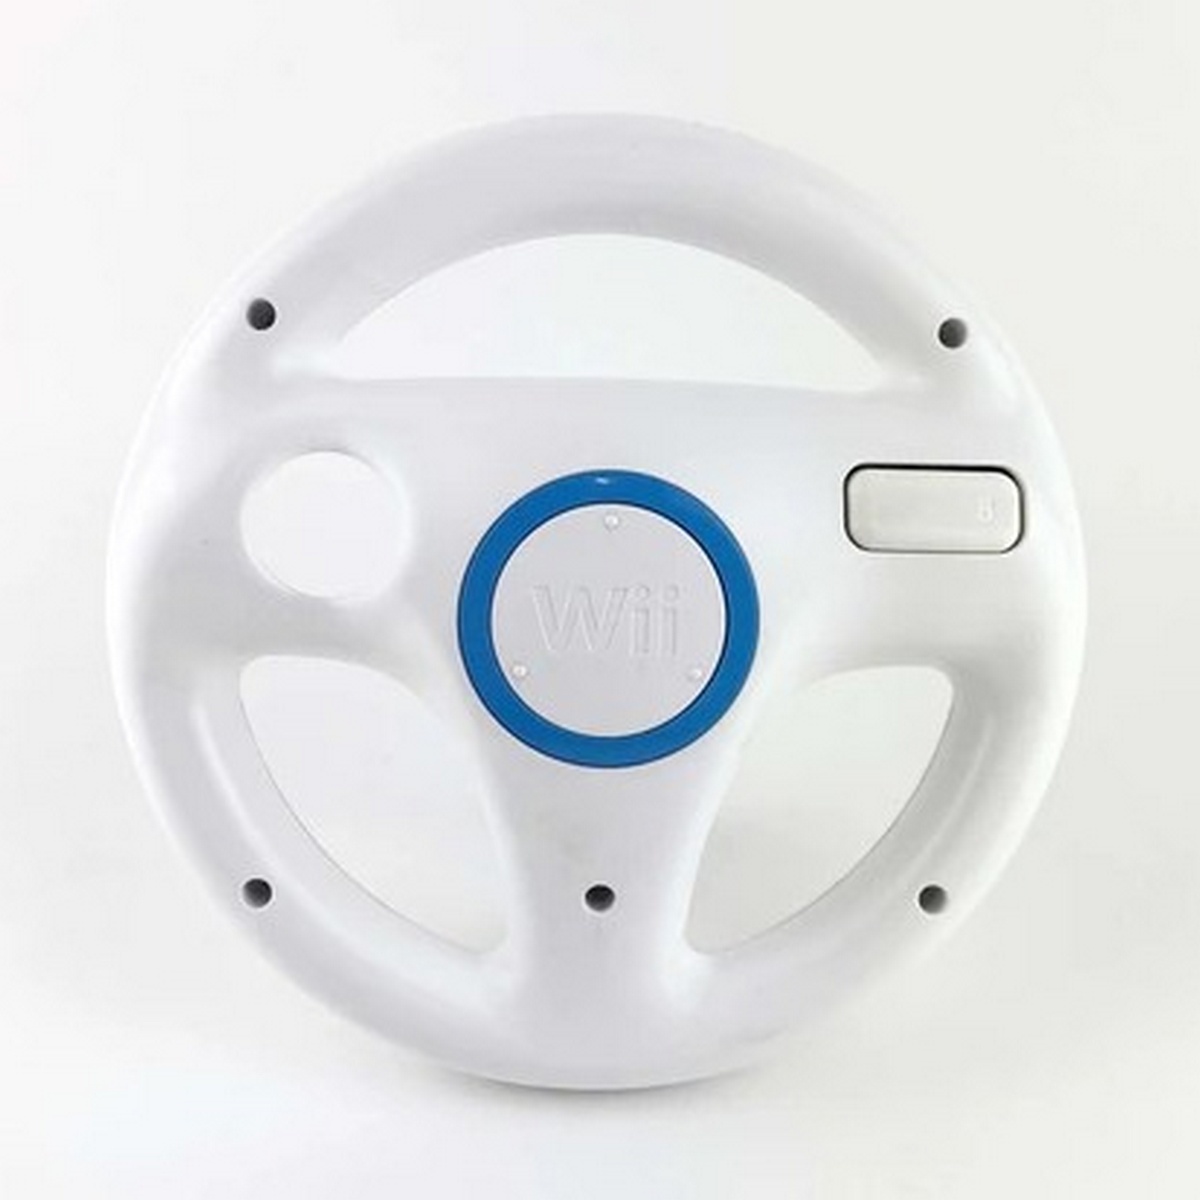 Wii U Steering Wheel Attachment - White OEM (Official)